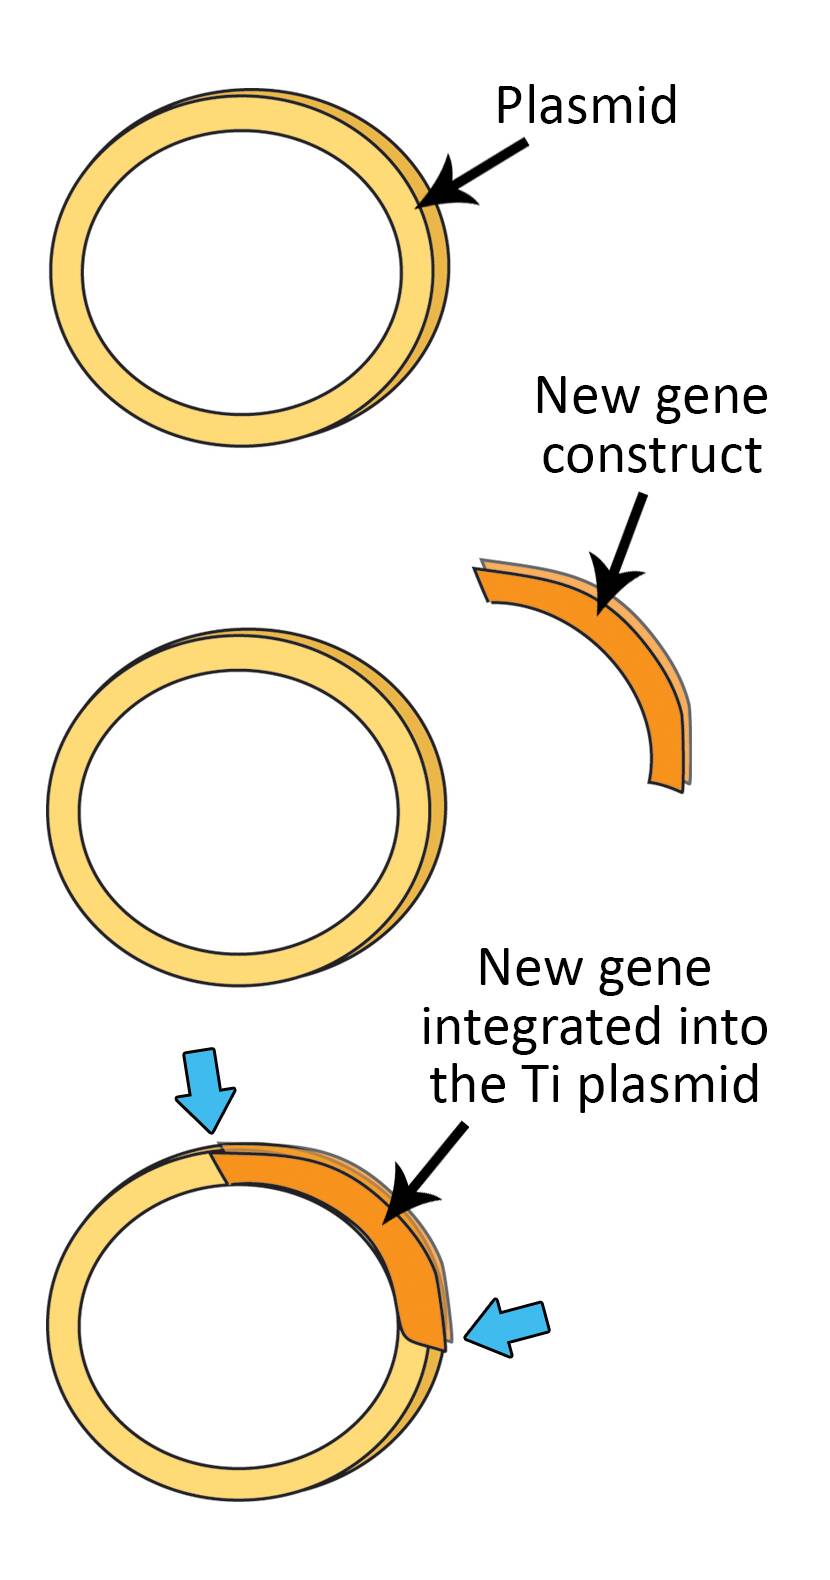 Illustration showing the new gene construct integrated into the Ti plasmid.